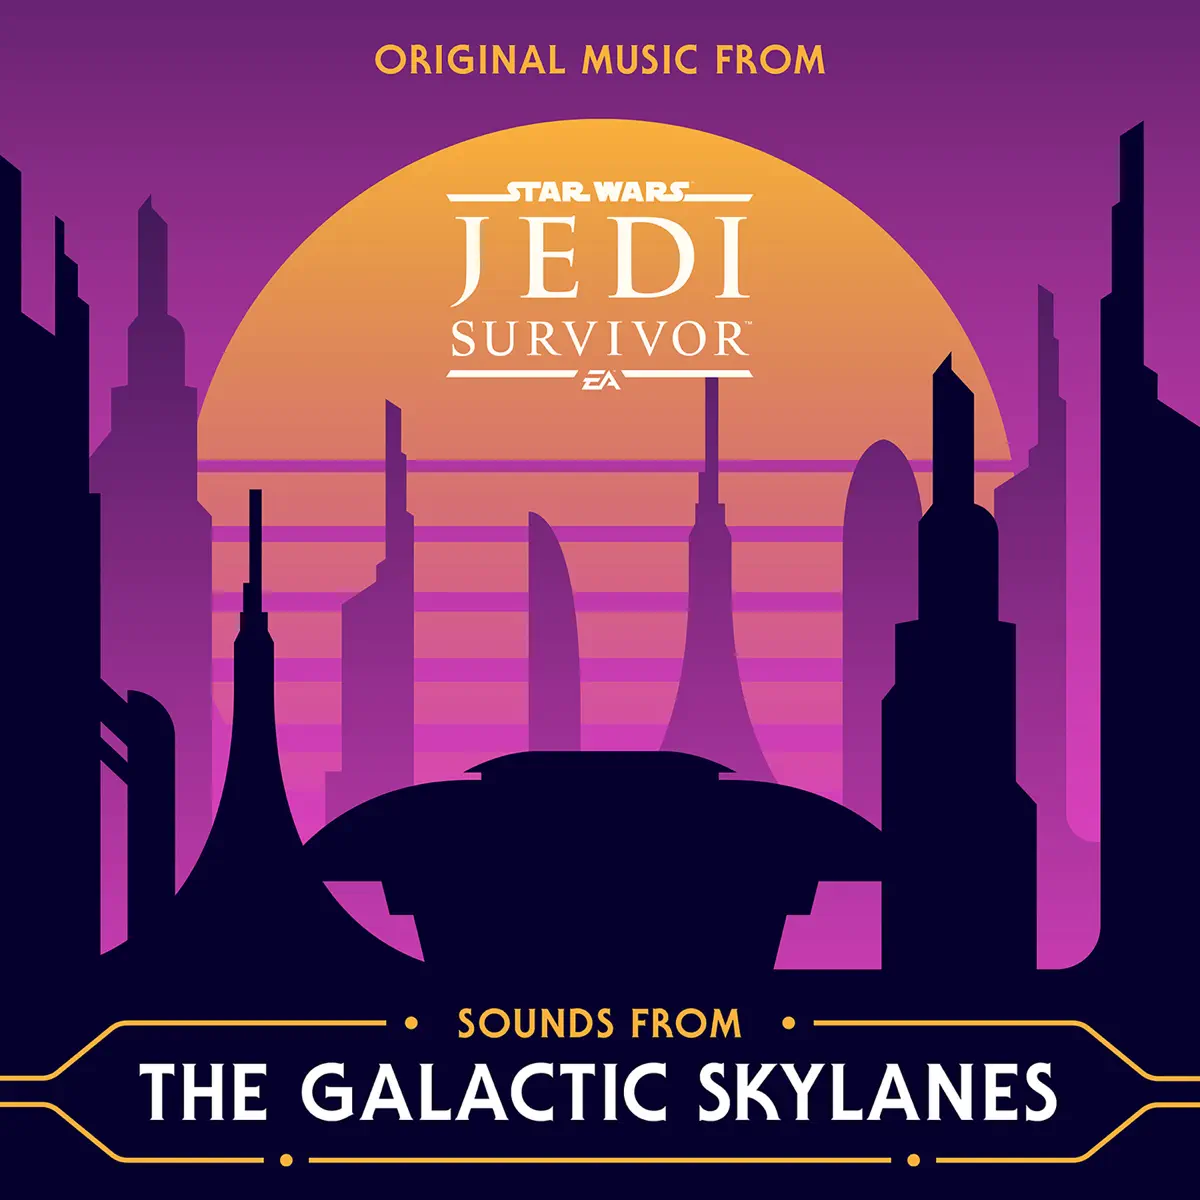 Various Artists - Sounds from the Galactic Skylanes (Original Music from Star Wars Jedi: Survivor) (2023) [iTunes Plus AAC M4A]-新房子